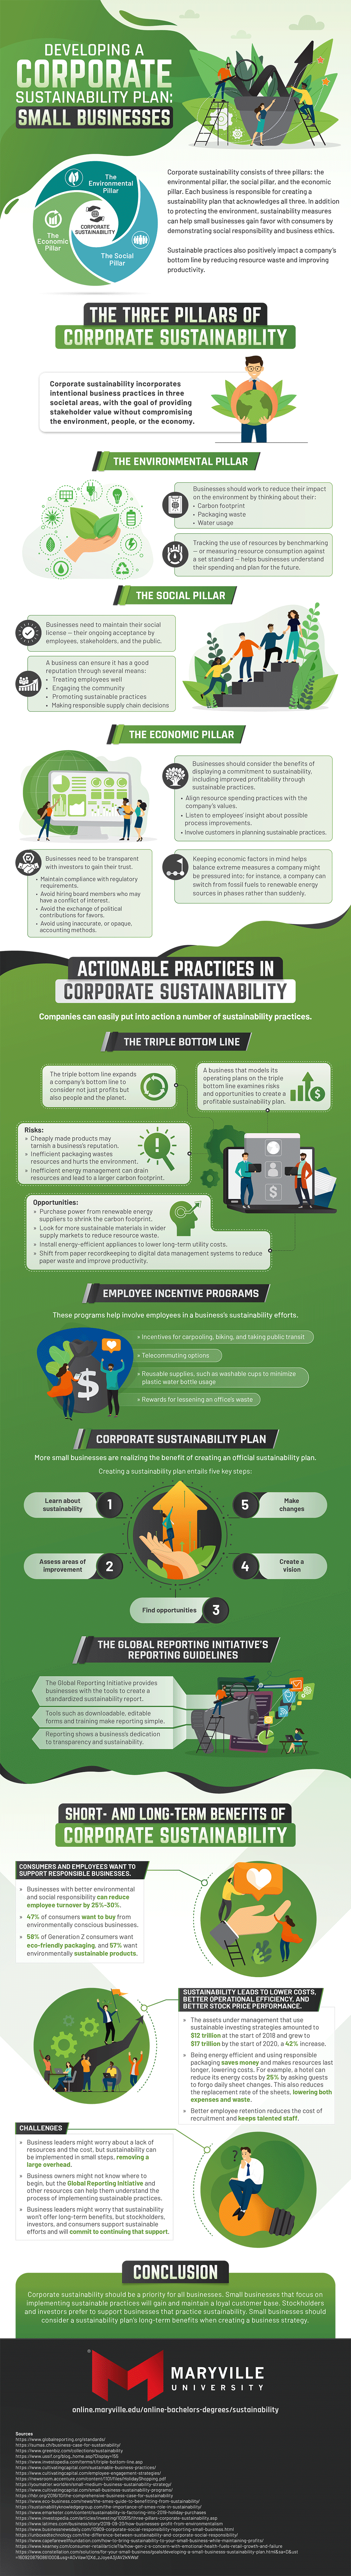 Information on how small businesses can develop a corporate sustainability plan.